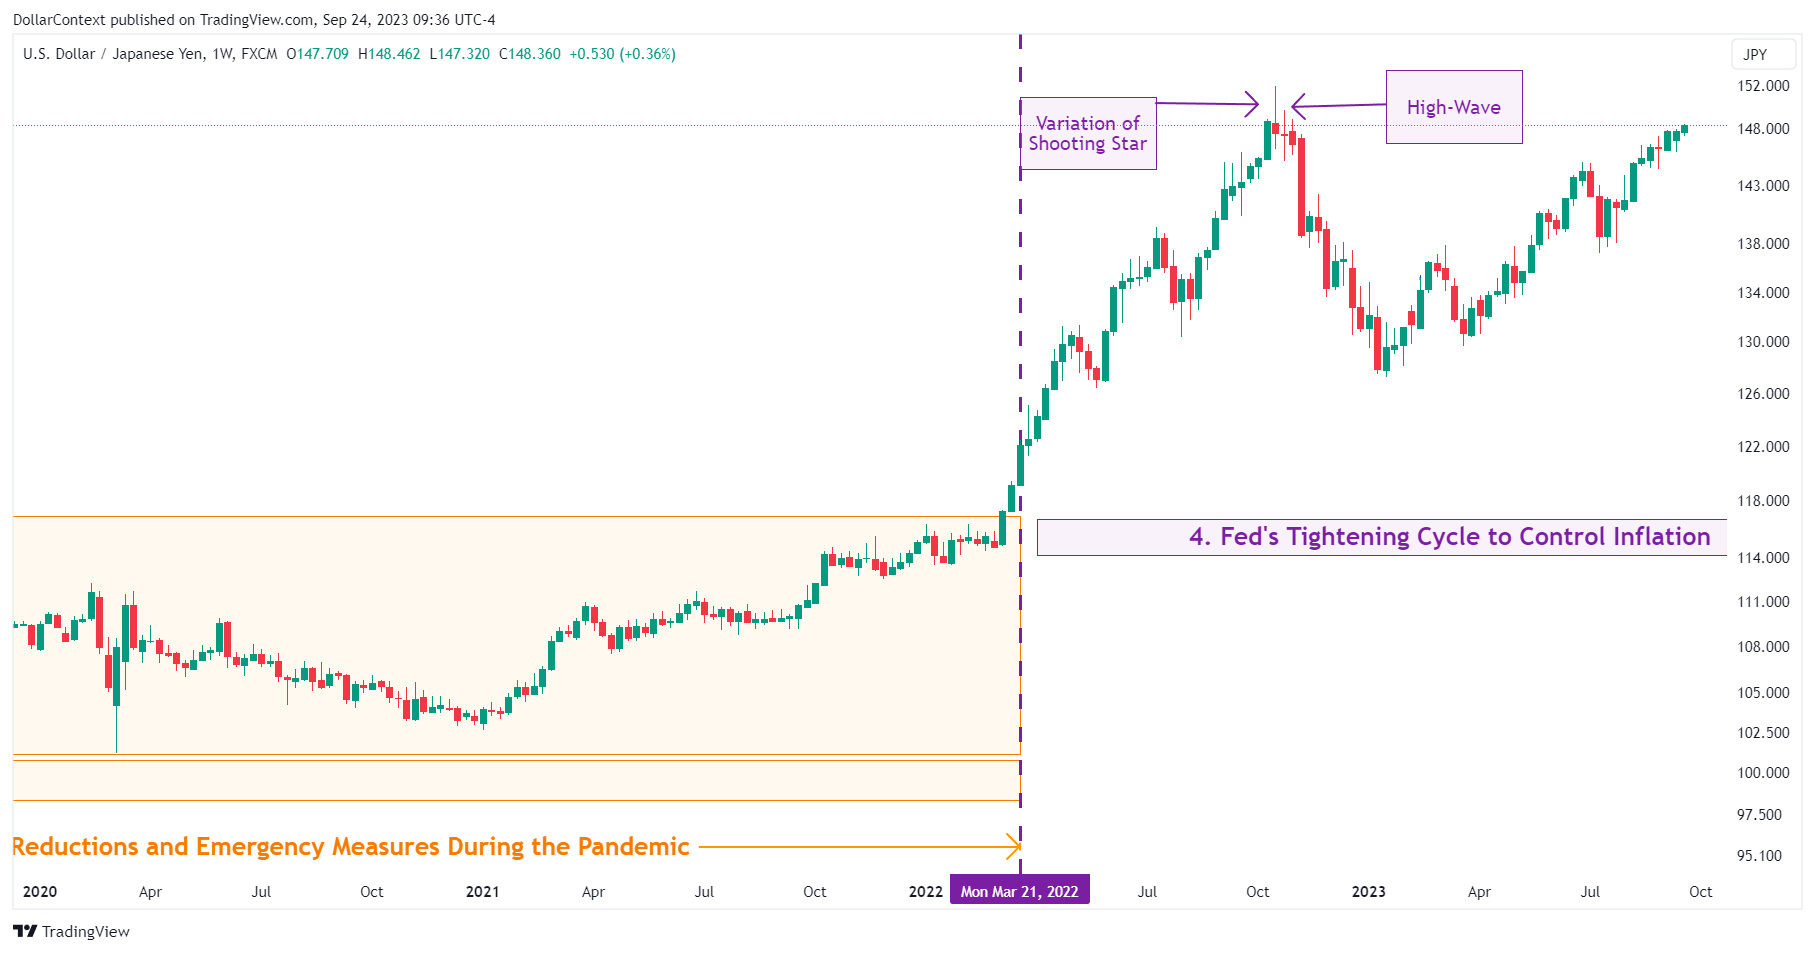 USD/JPY: The Fed's Tightening Cycle in 2022 and 2023 (Weekly Chart)